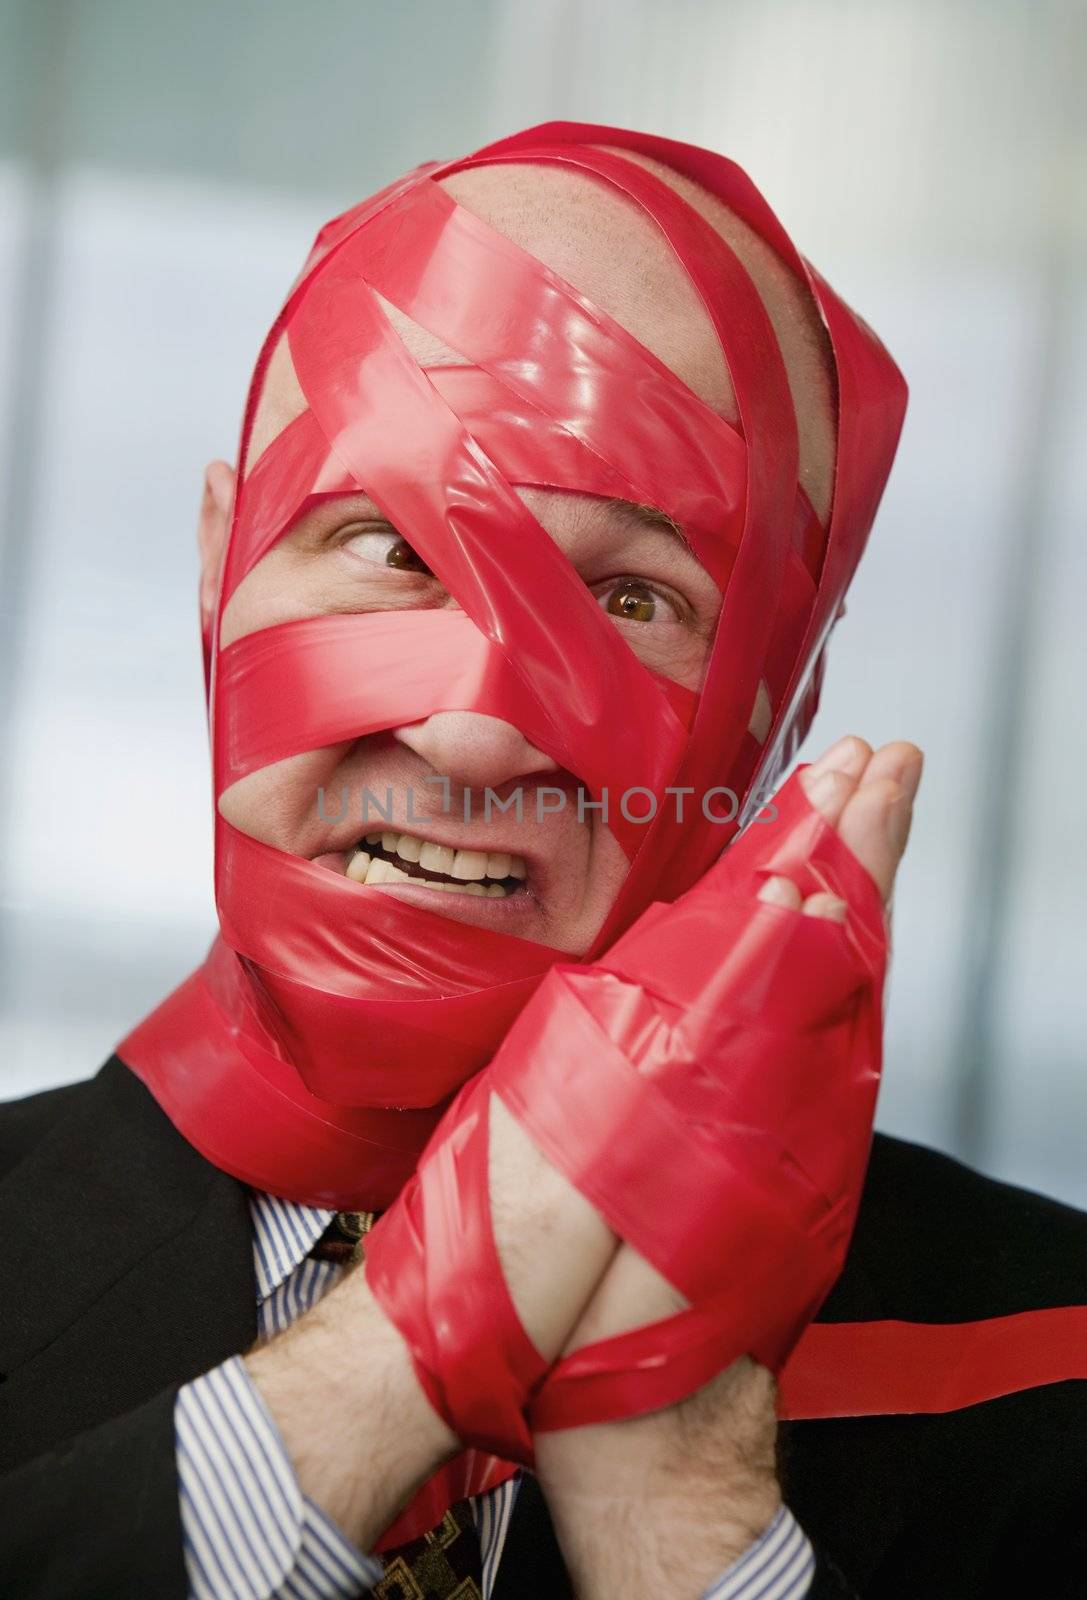 Cross-eyed businessman wrapped in red tape